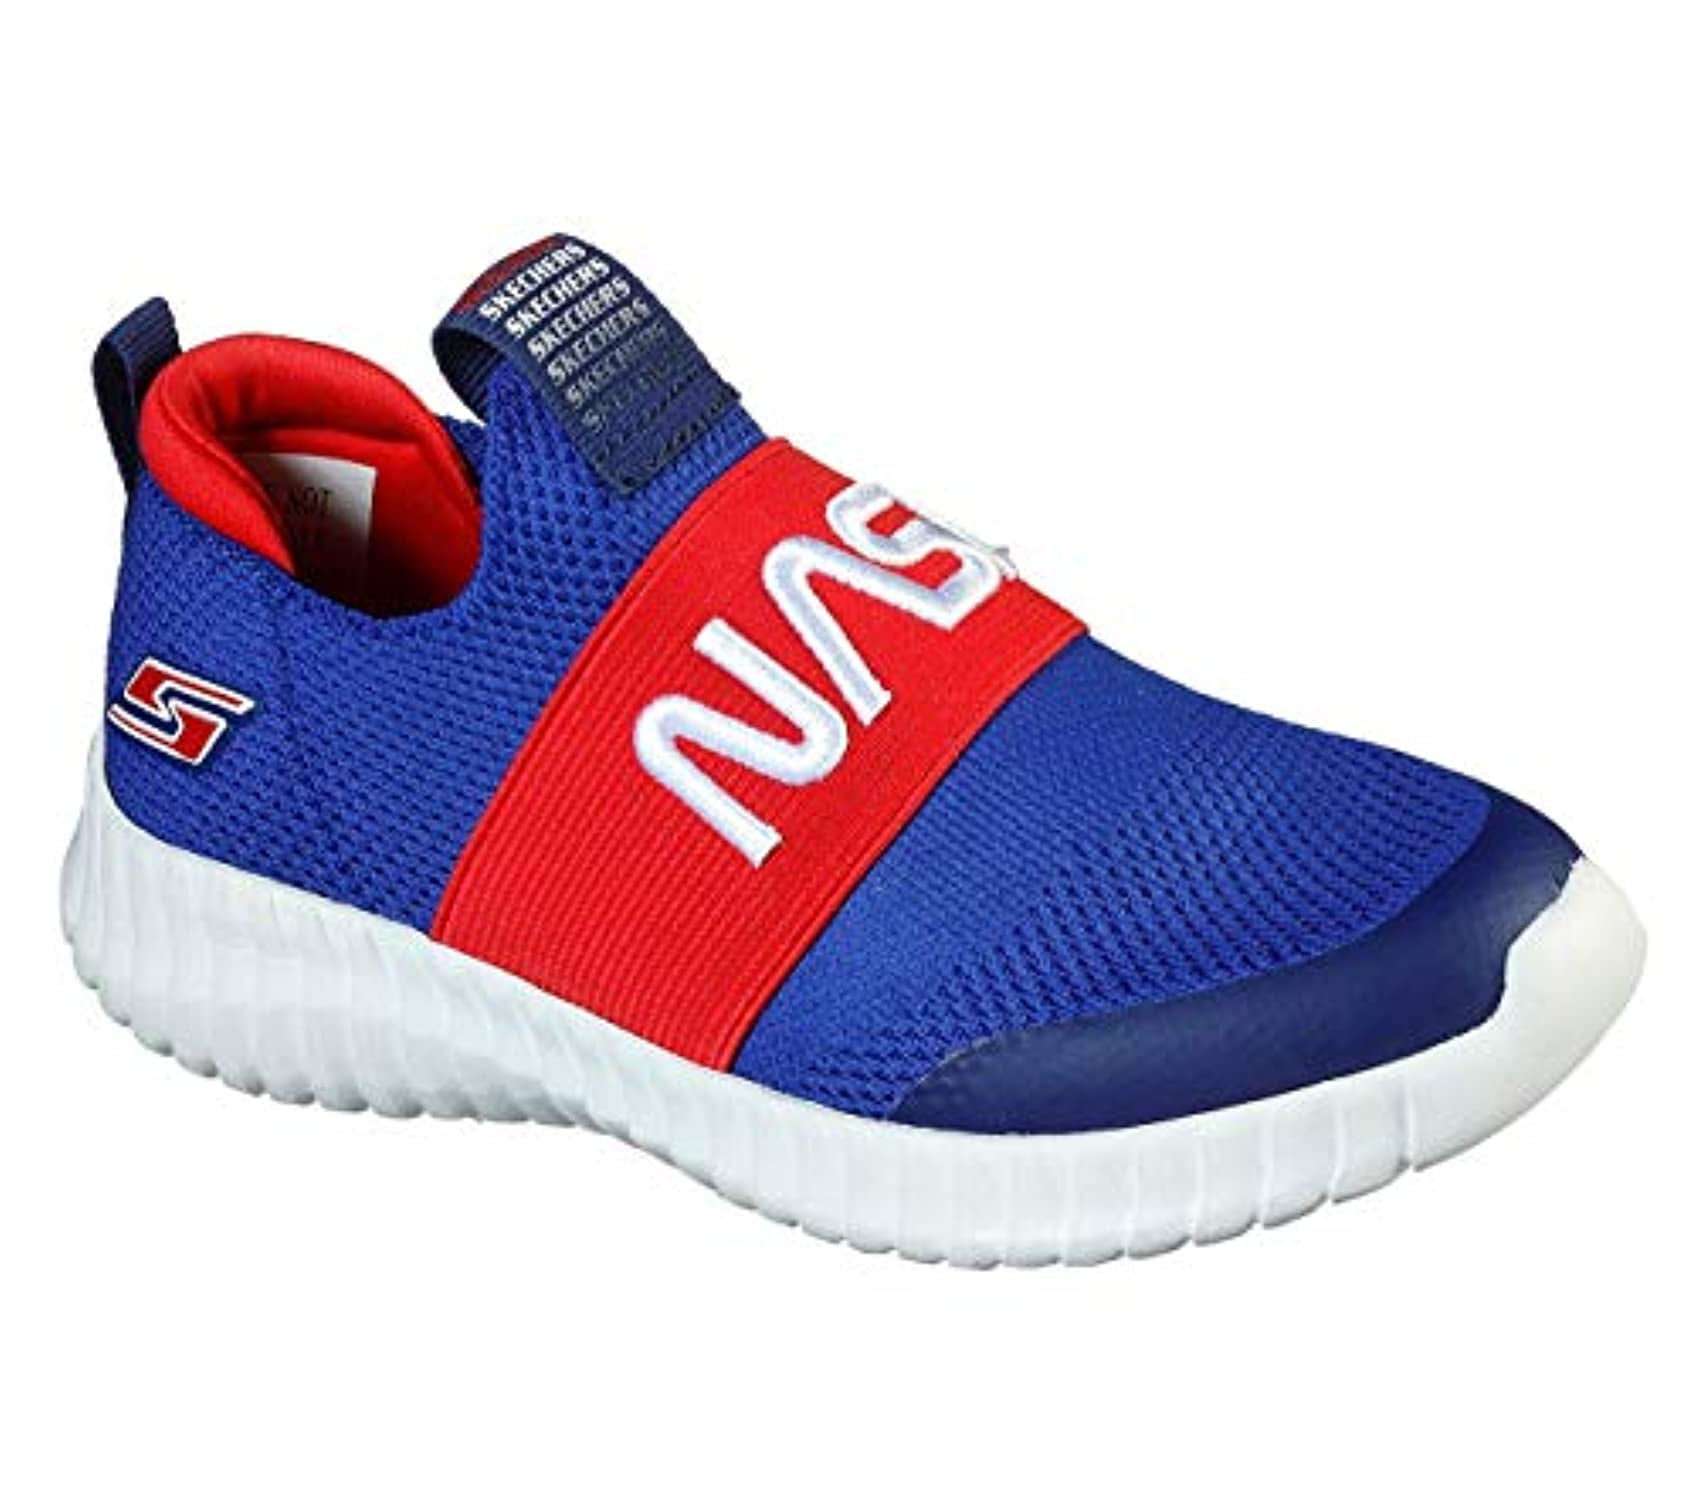 red and blue skechers